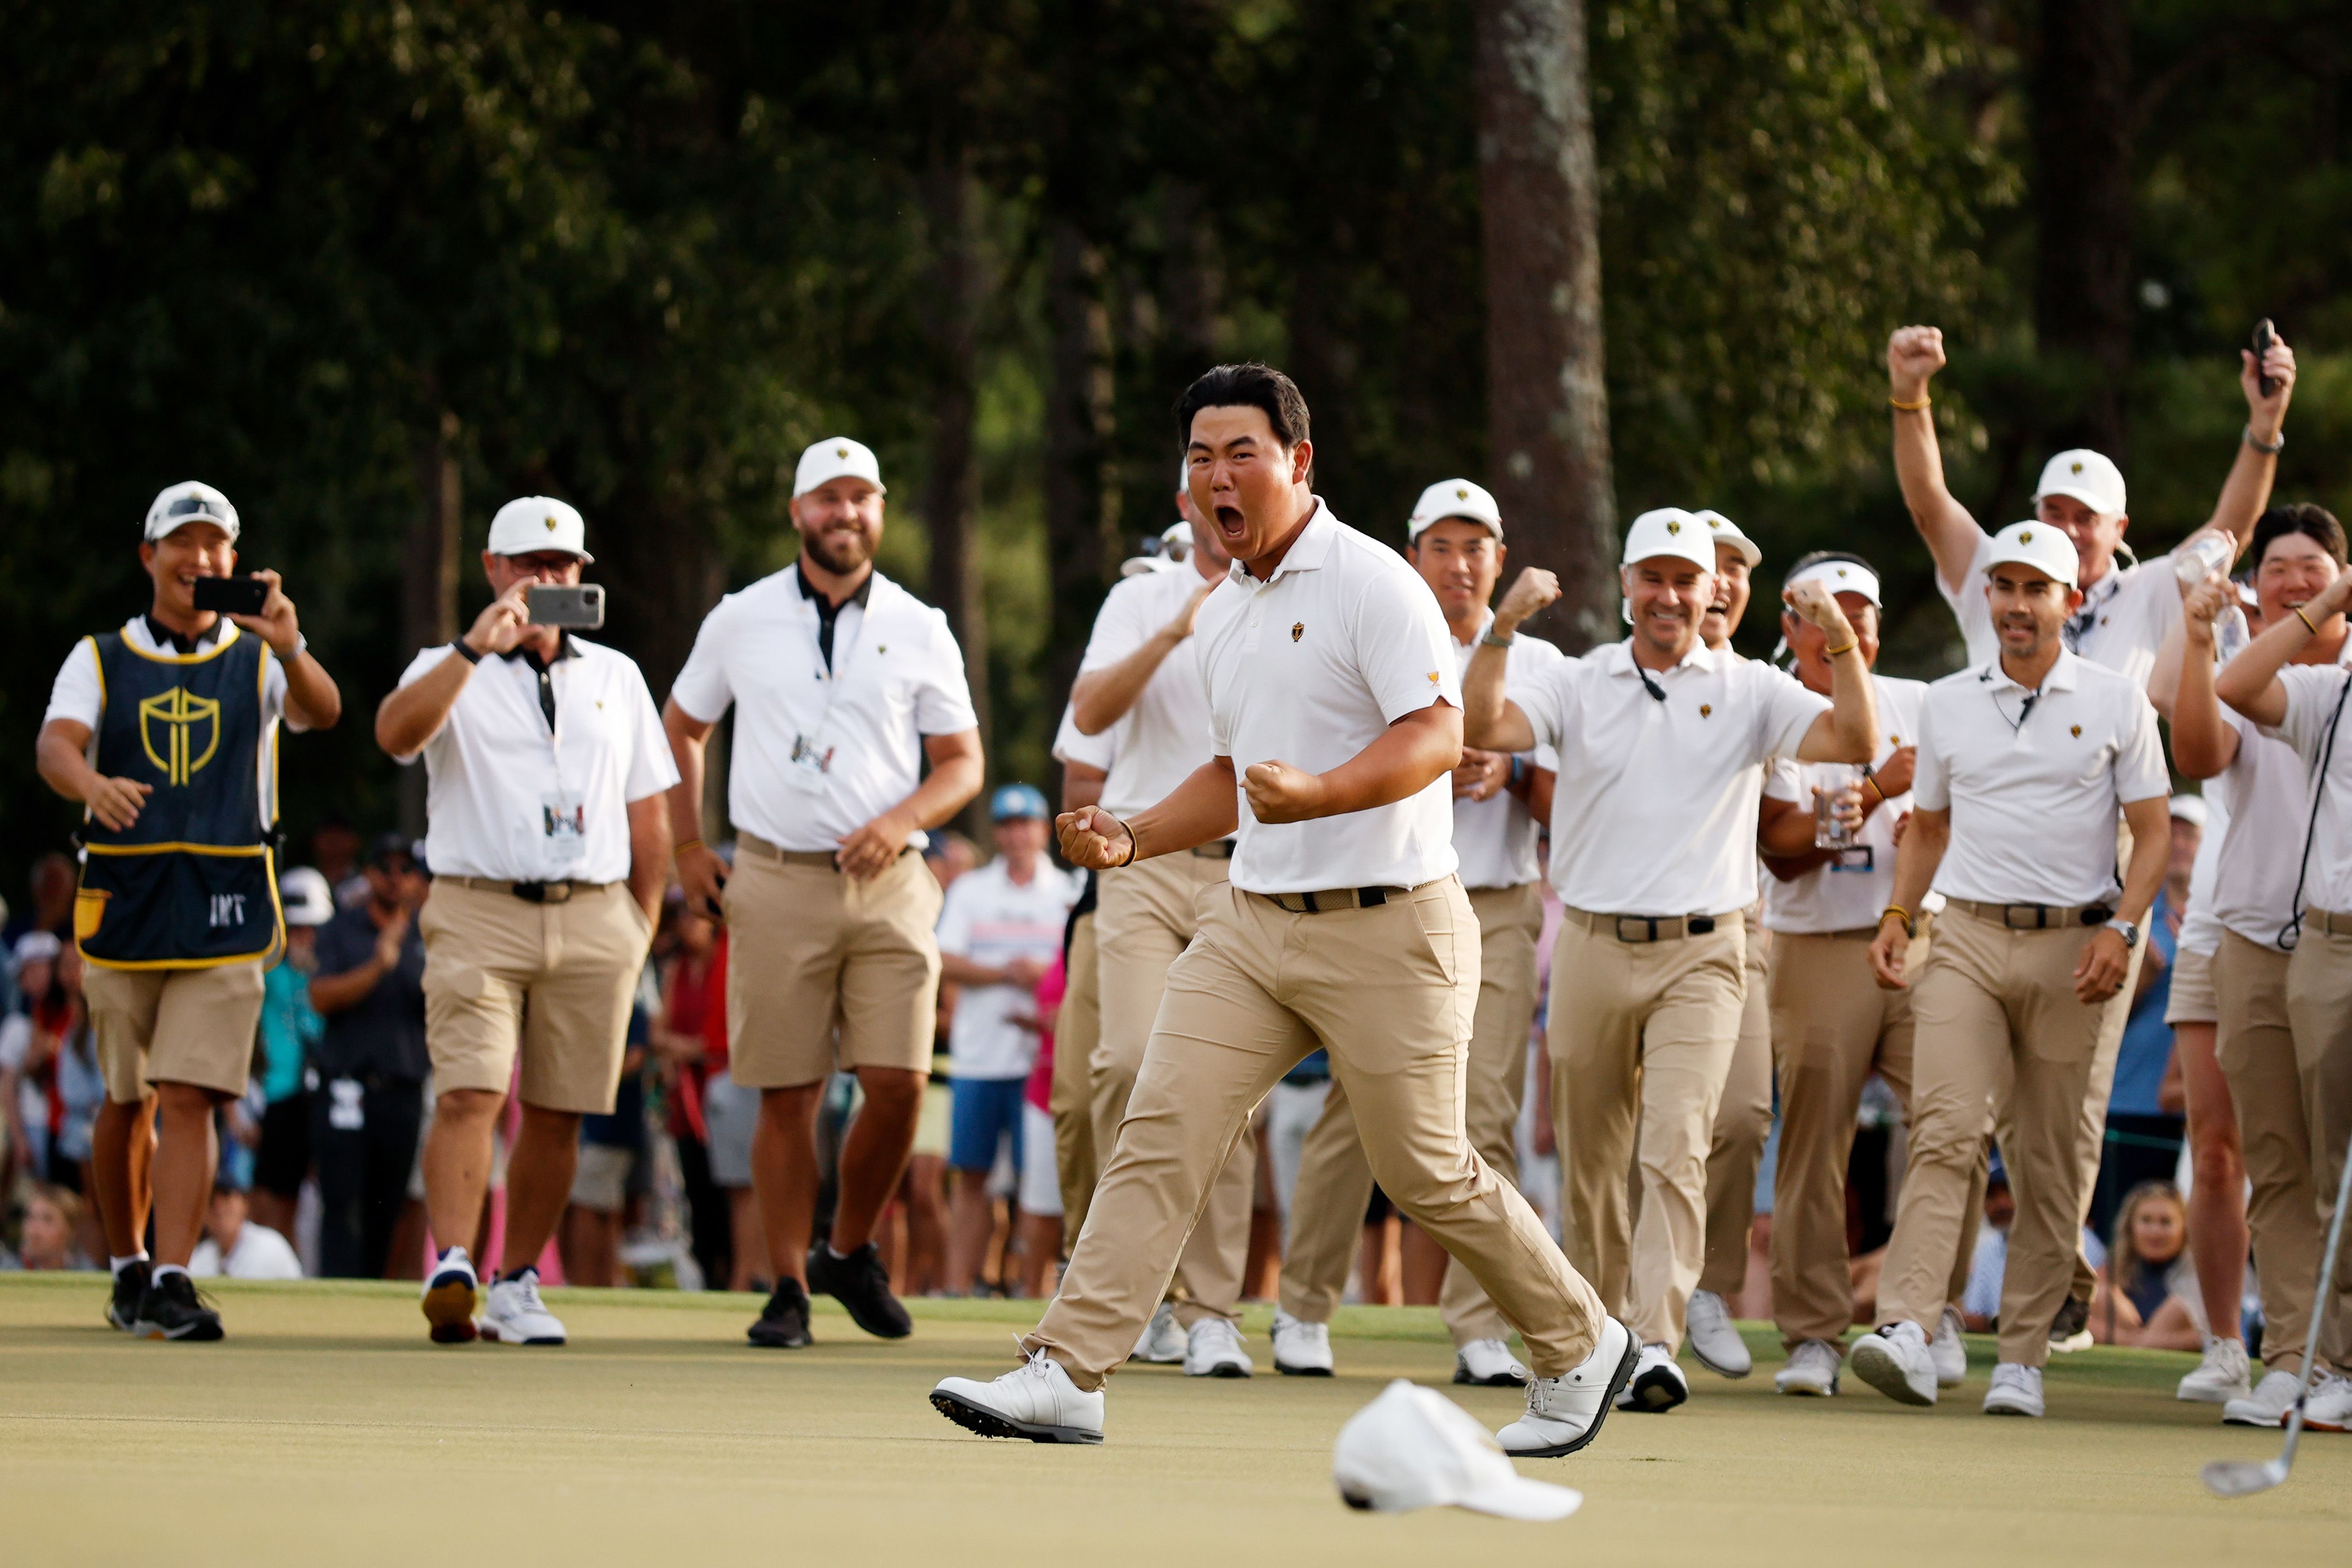 Netflix series 'Full Swing' takes golf fans behind the PGA Tour scenes,  generally succeeds